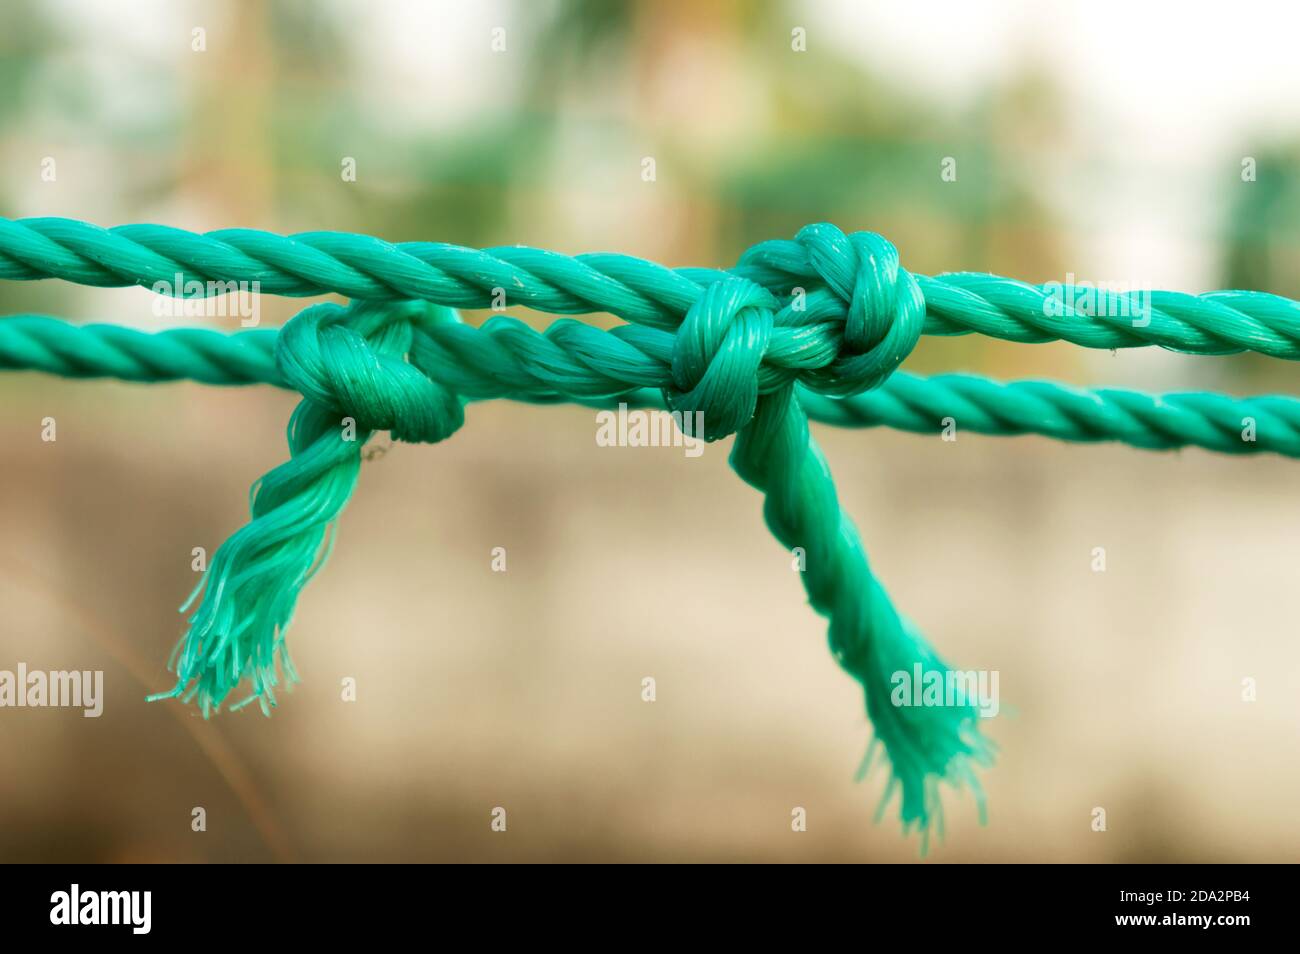 Rope tie knot Closeup. Rope with a two tied knot in the middle